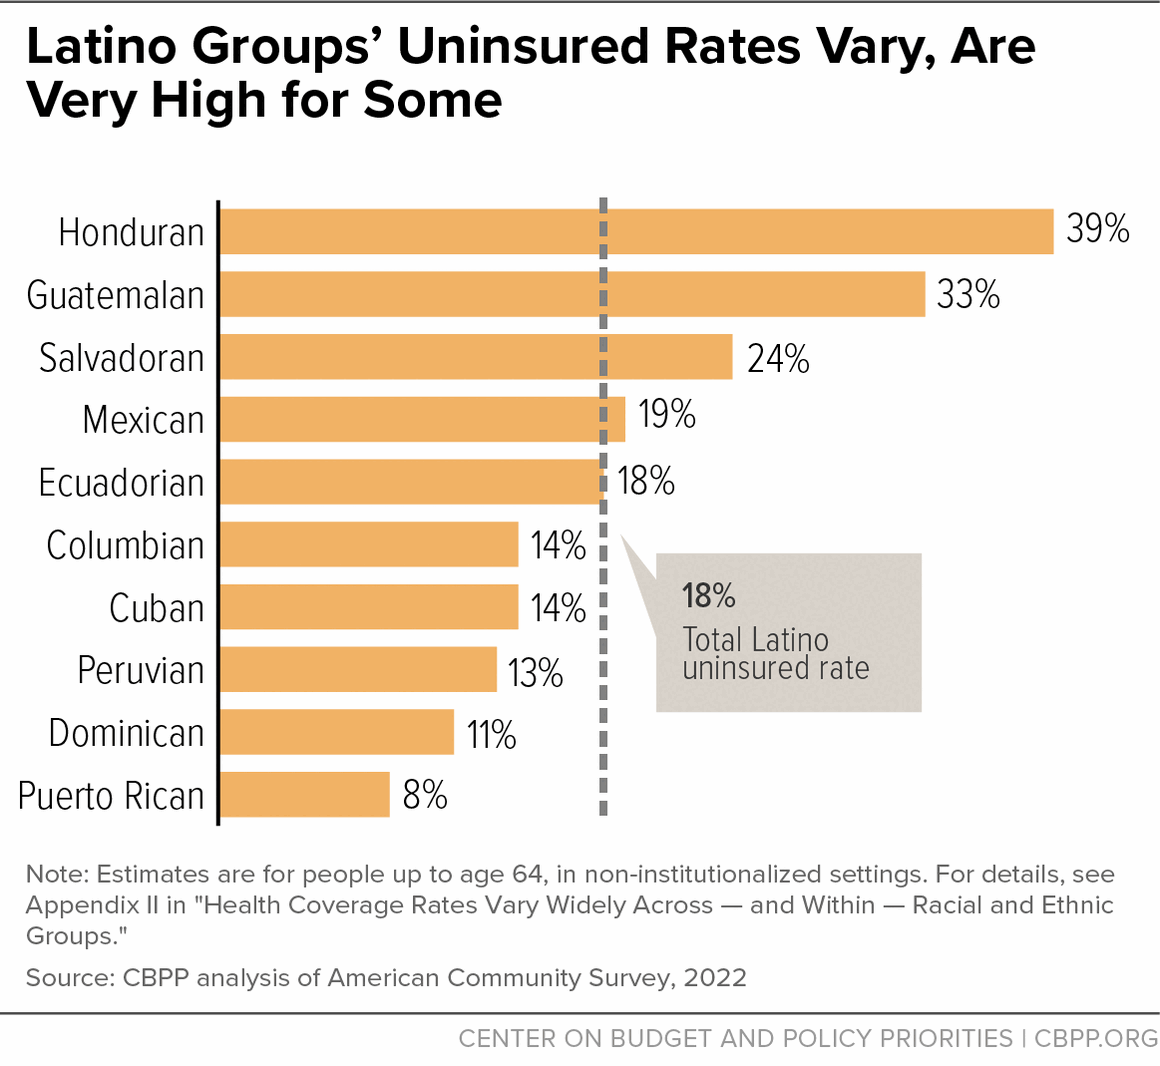 Latino Groups' Uninsured Rates Vary, Are Very High for Some